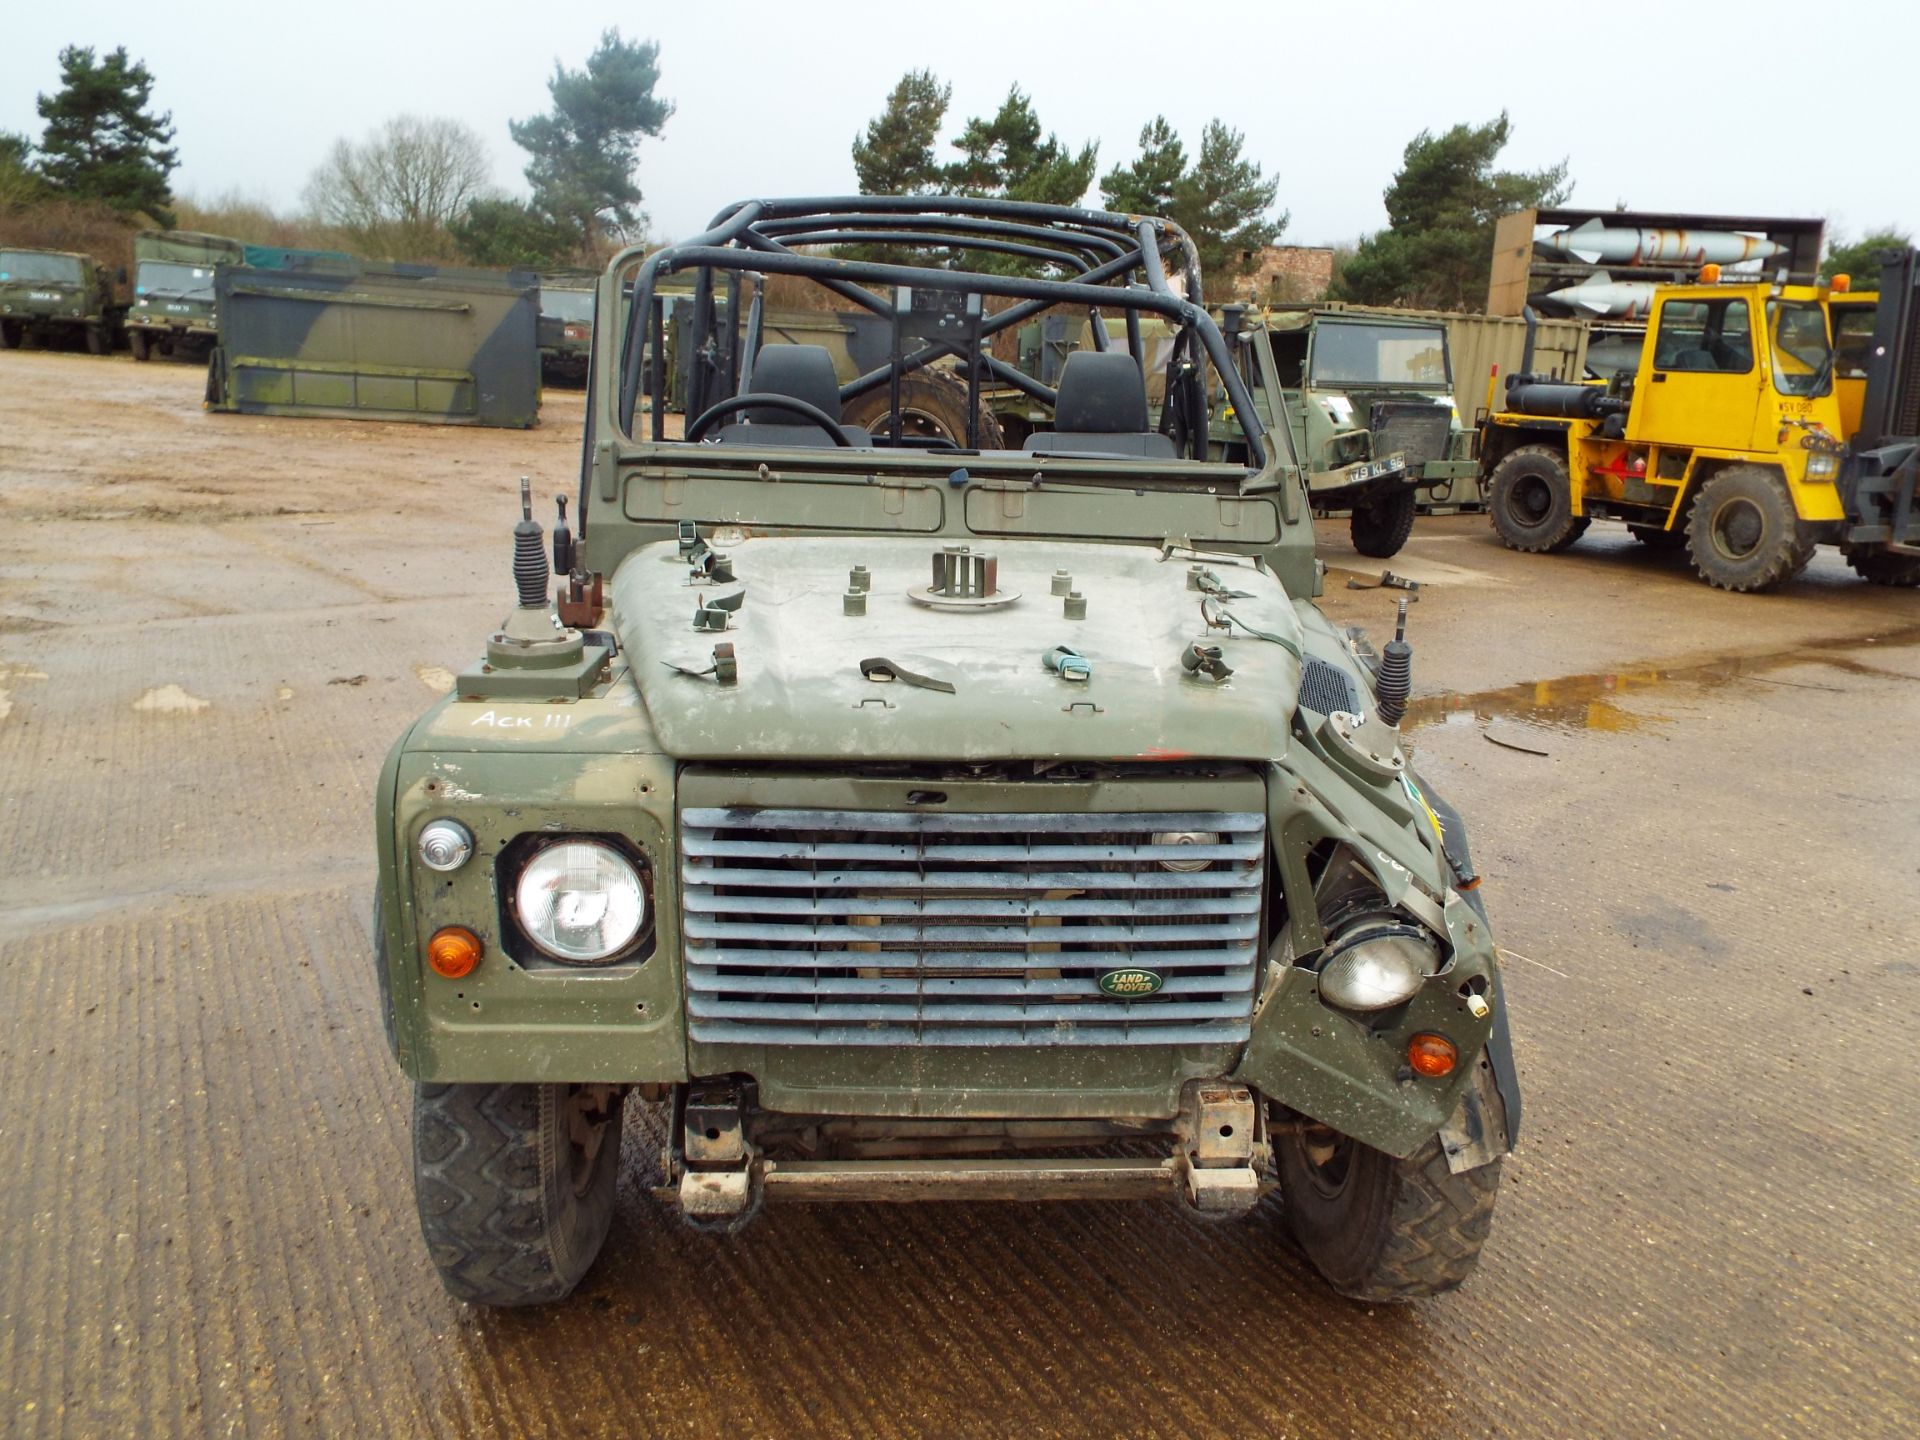 Military Specification Land Rover Wolf 110 Hard Top - Image 2 of 27